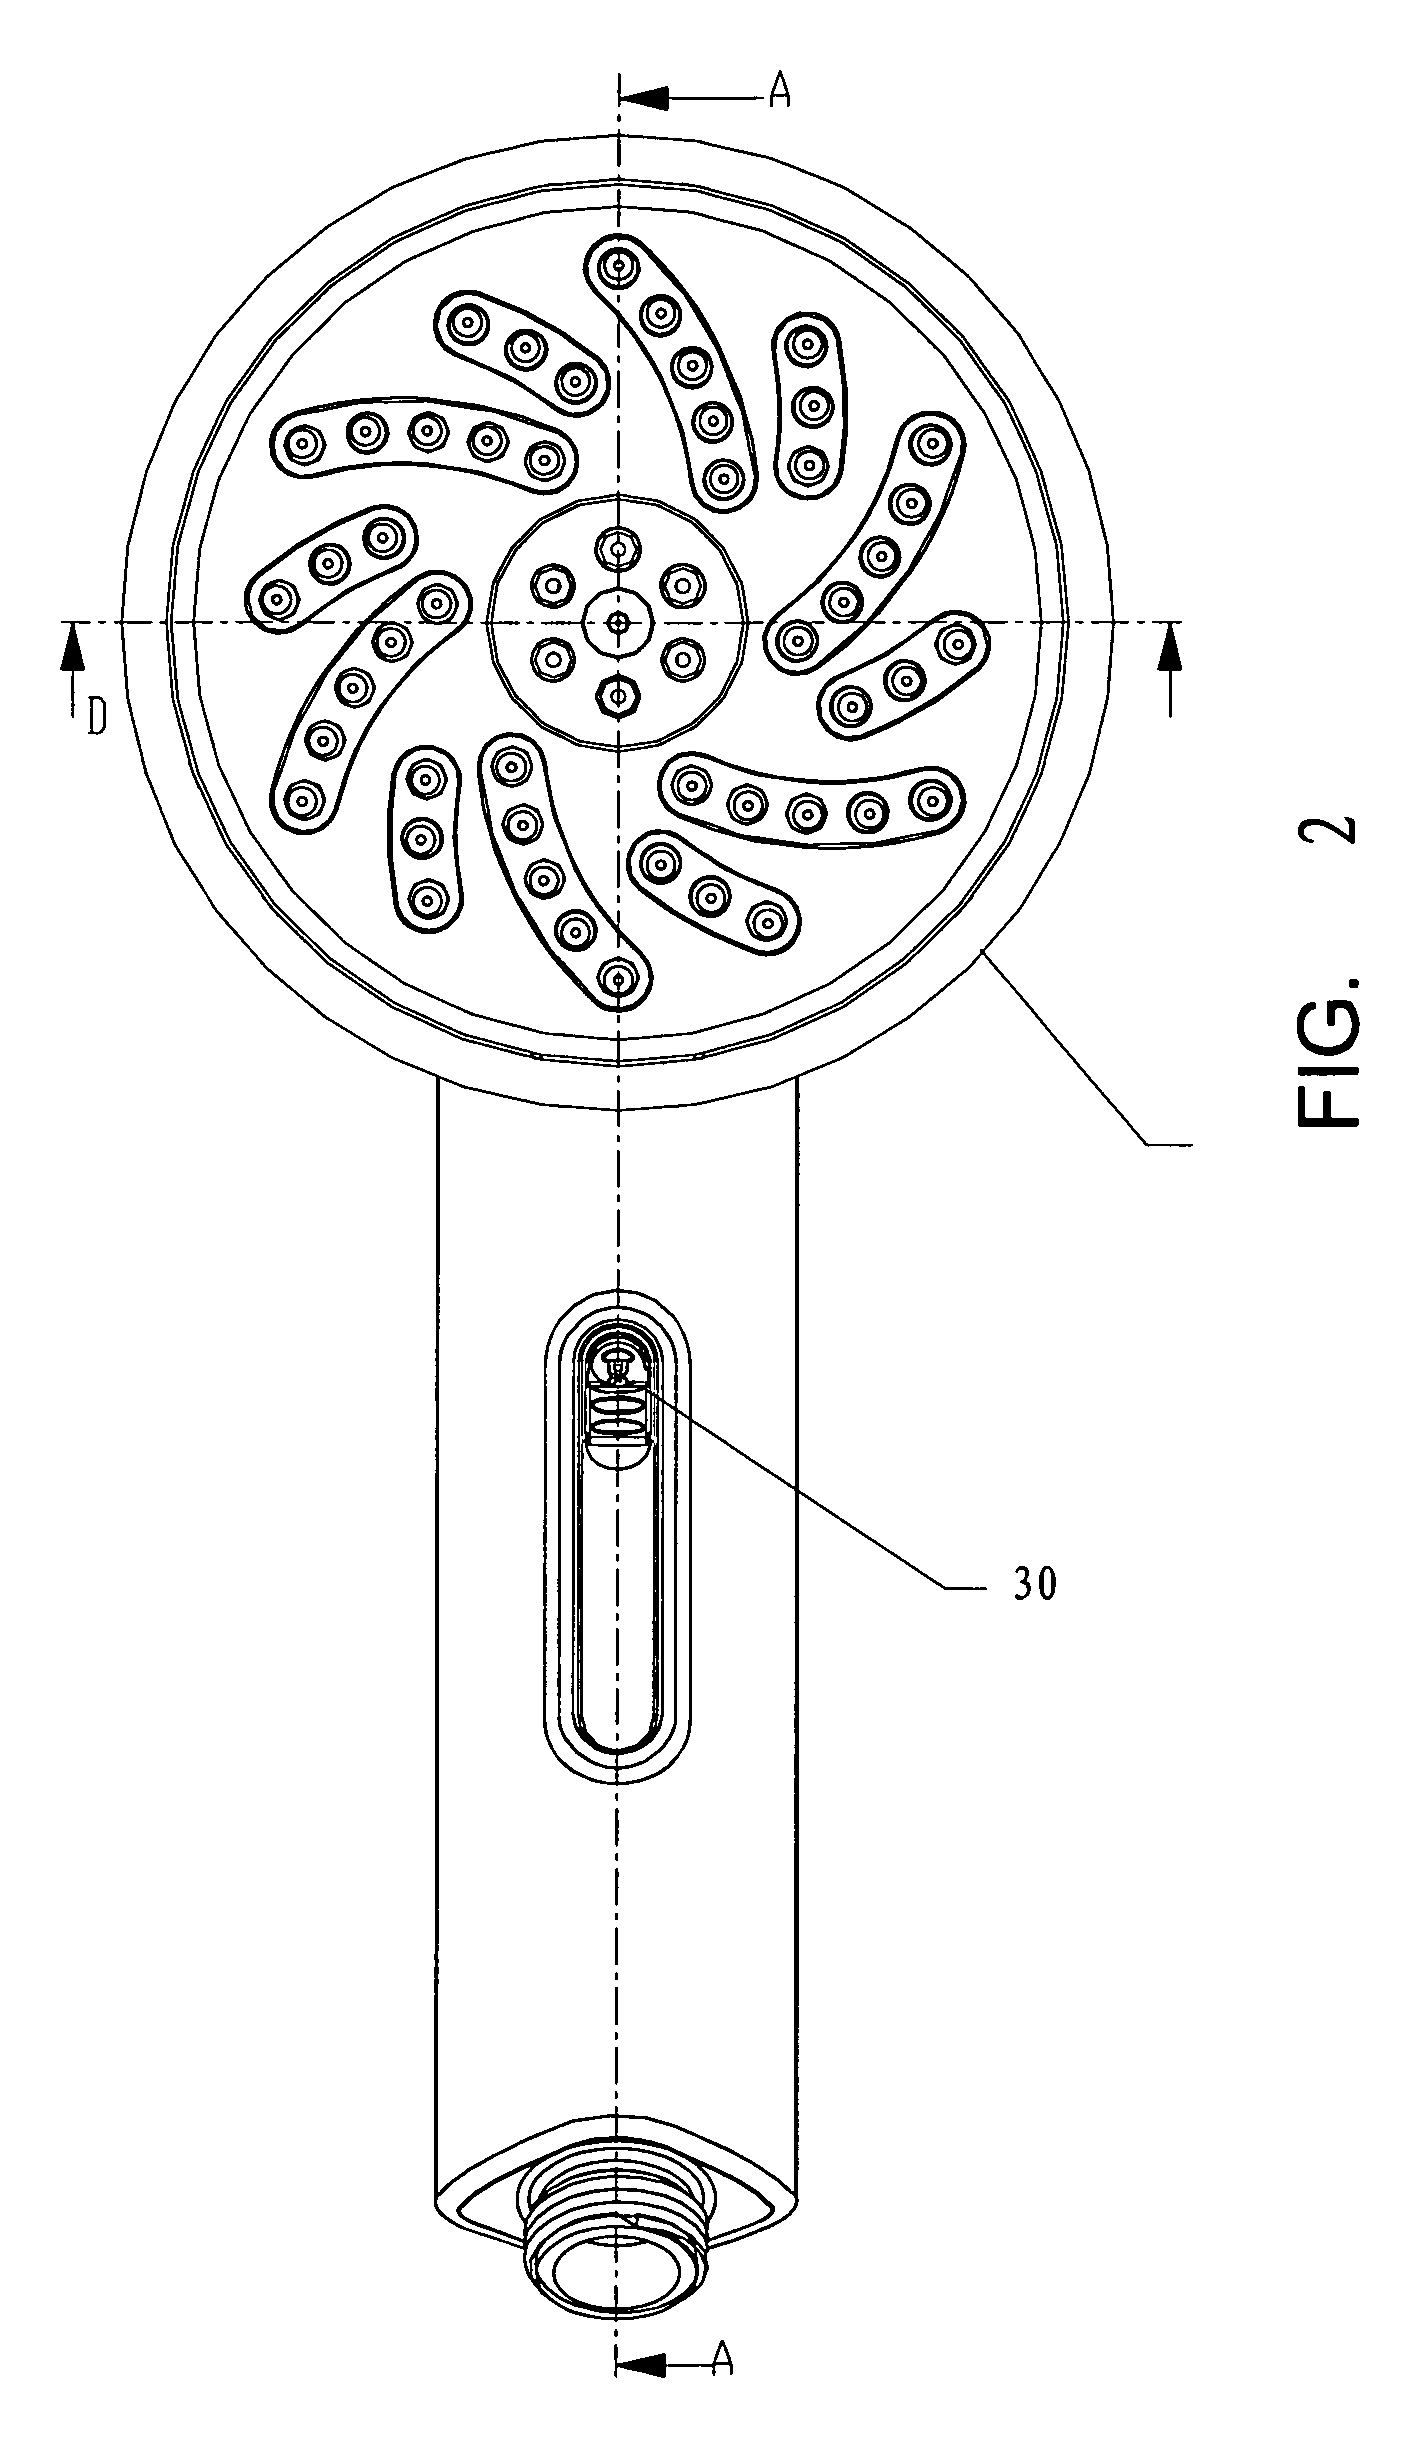 Water Outlet Control Device of Shower Spray Nozzle